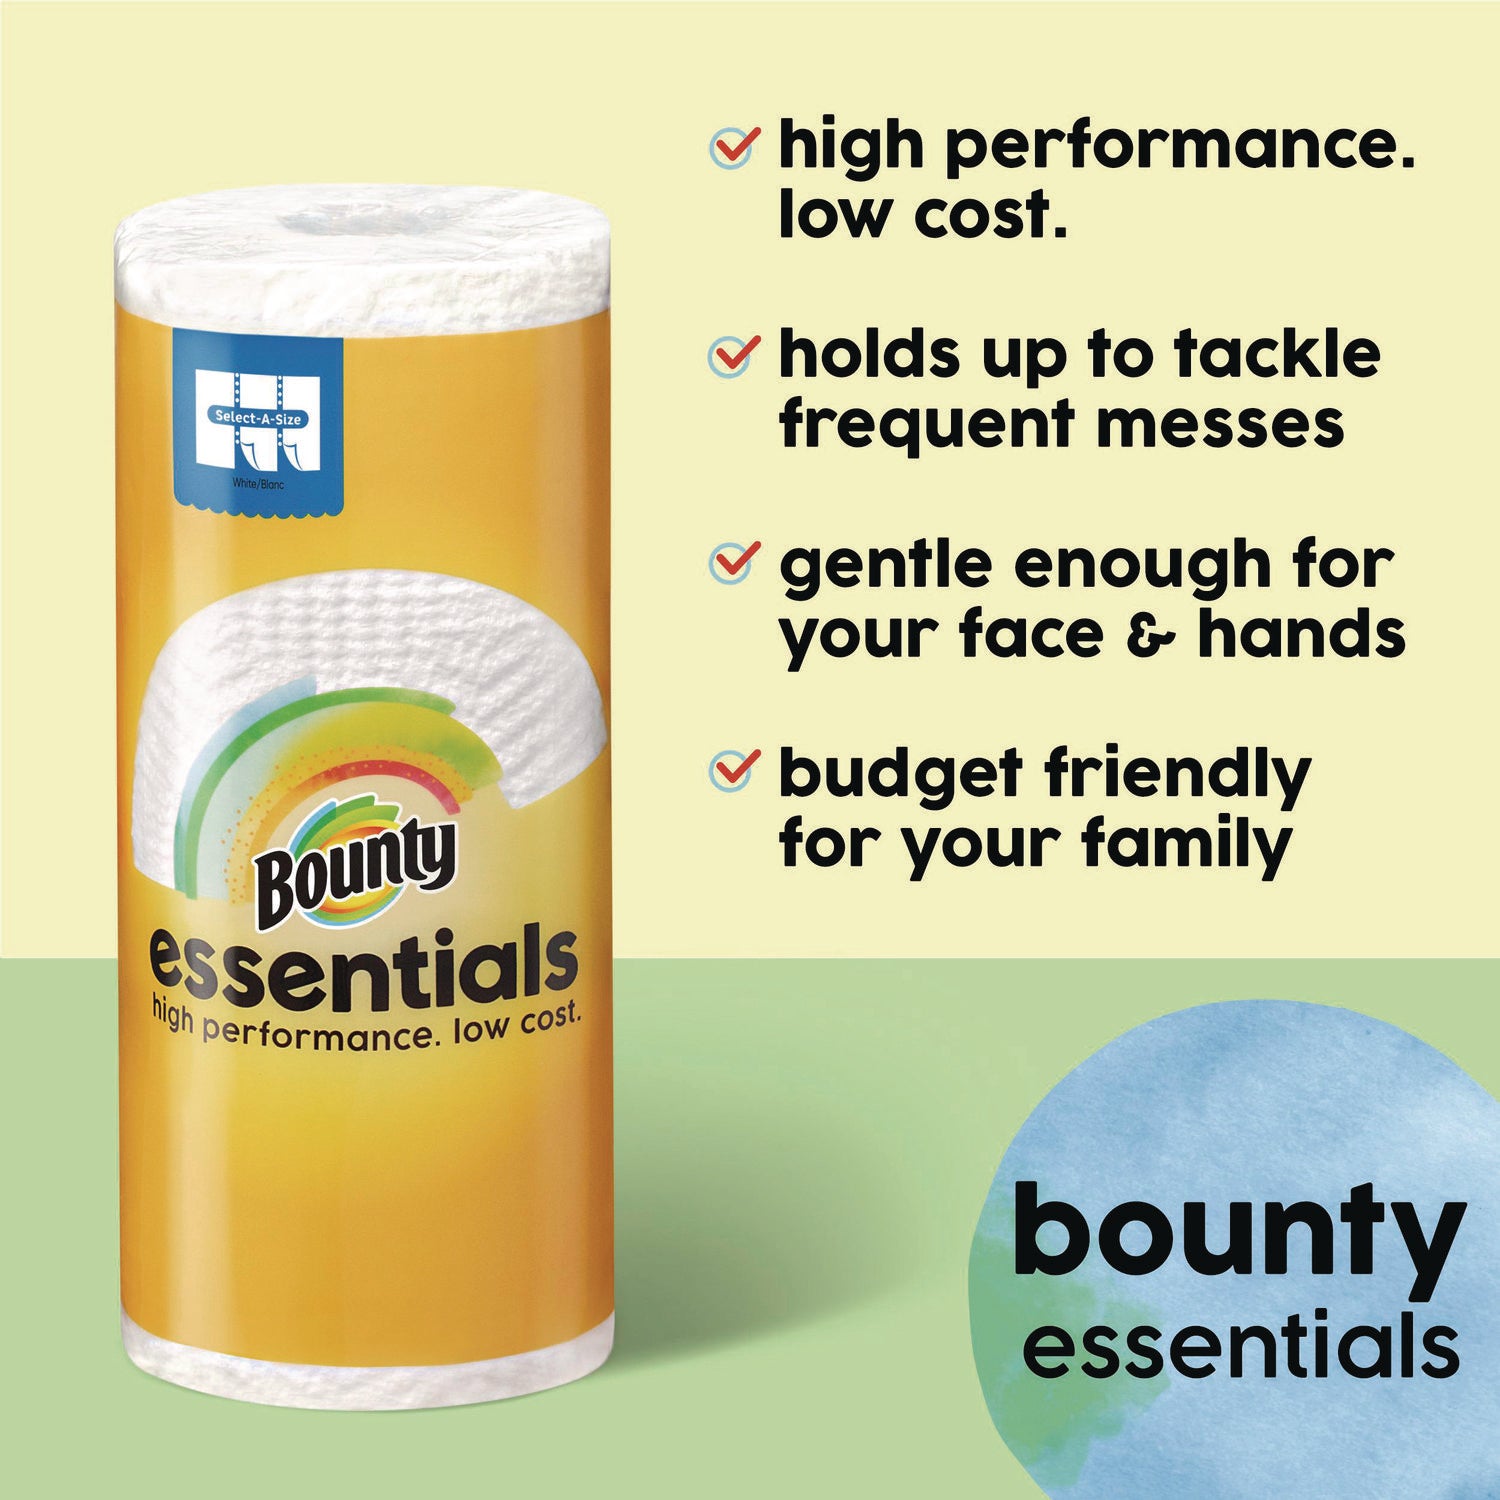 essentials-select-a-size-kitchen-roll-paper-towels-2-ply-108-sheets-roll-12-rolls-carton_pgc11093 - 8